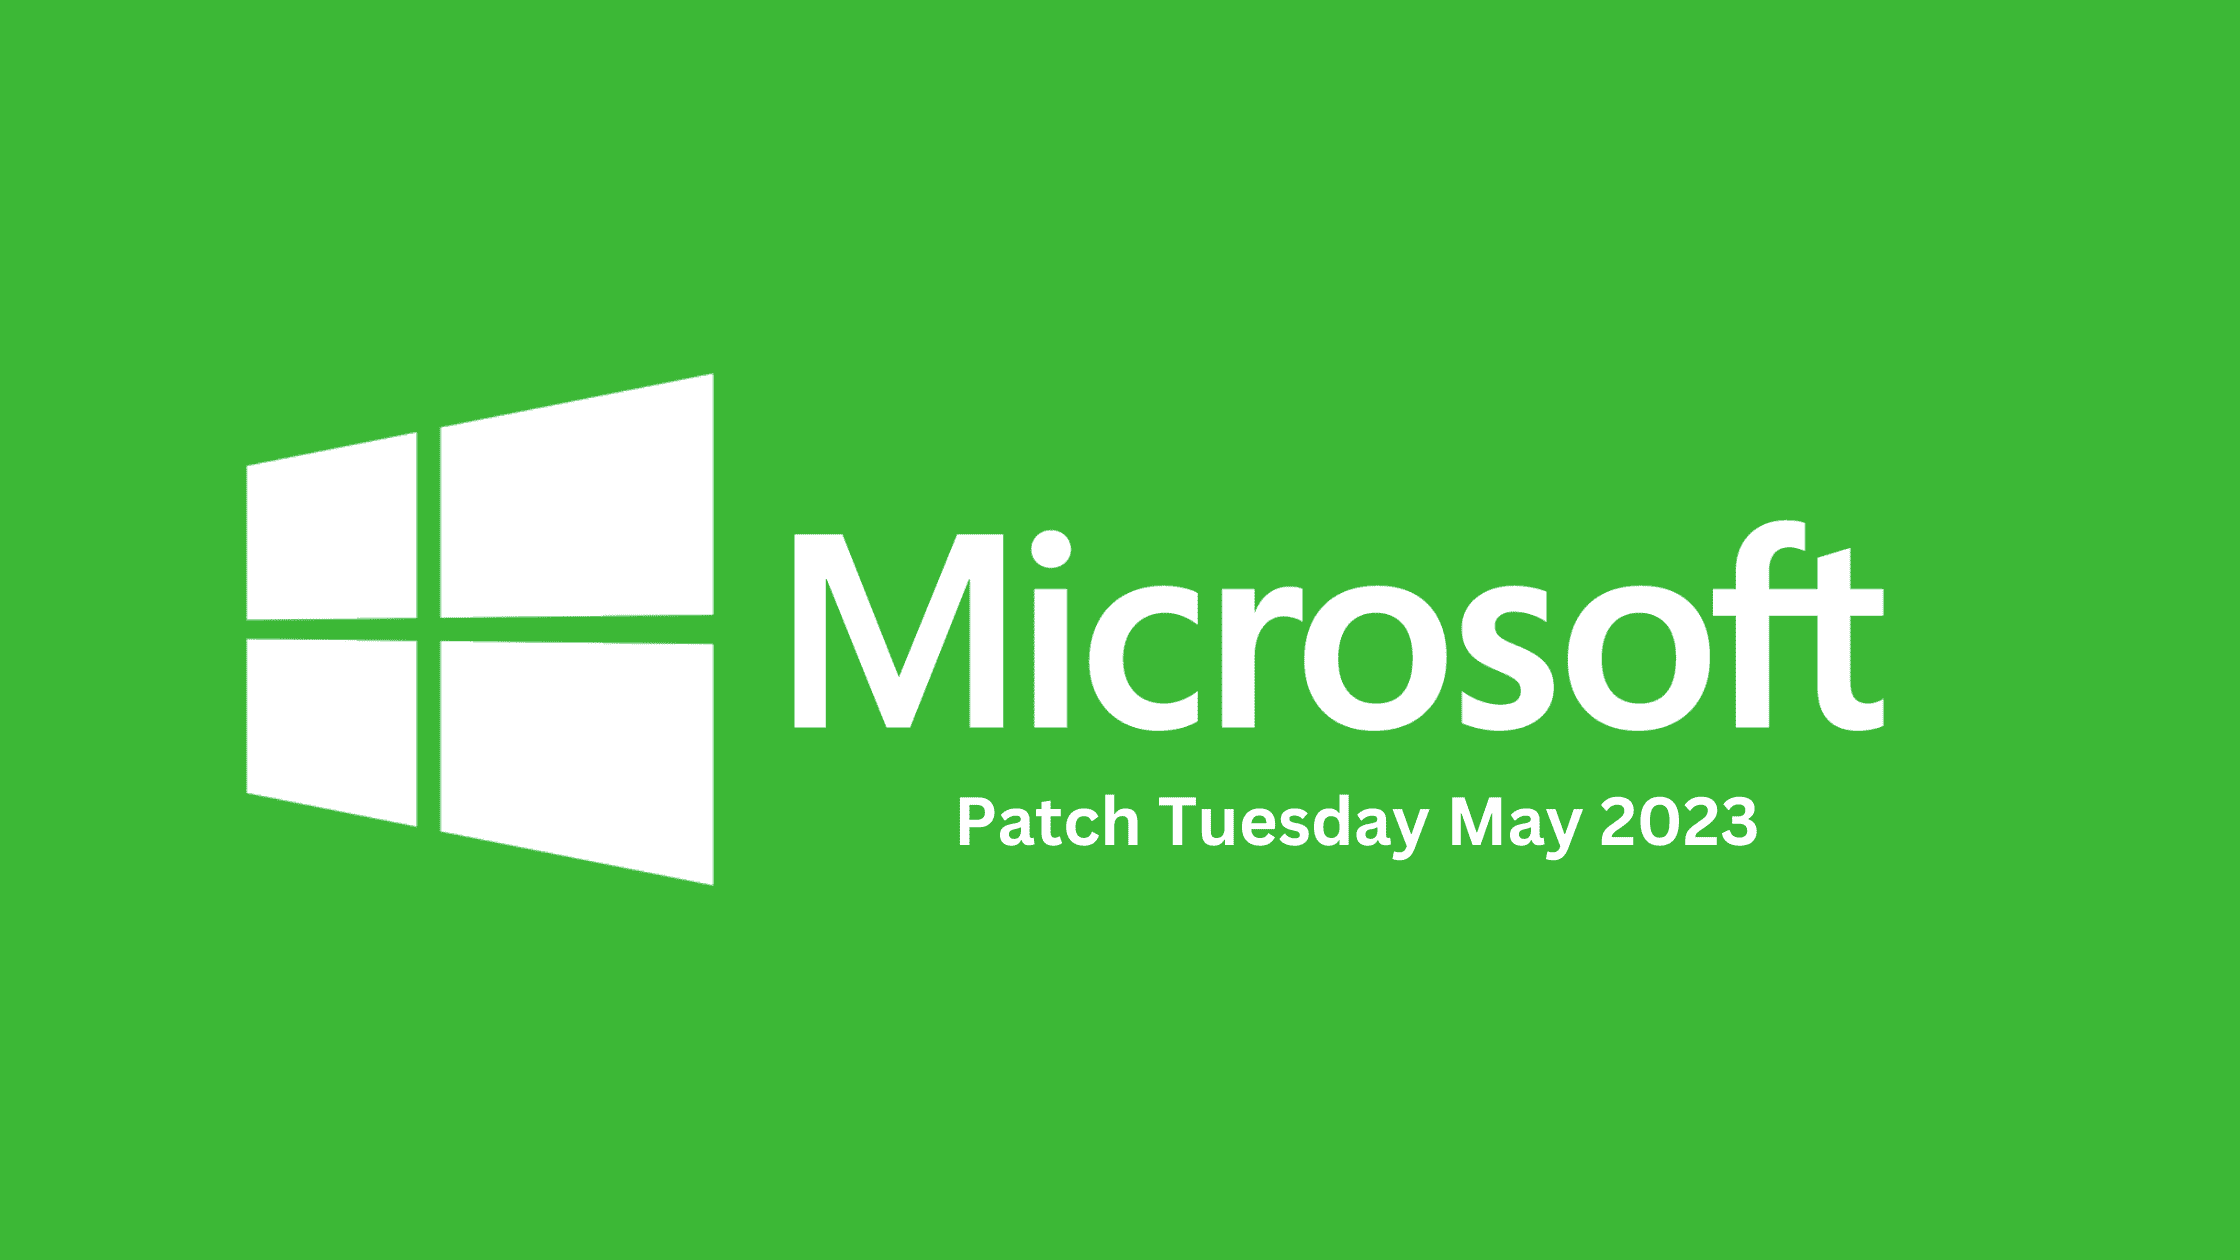 Breaking Down The Latest May 2023 Patch Tuesday Report